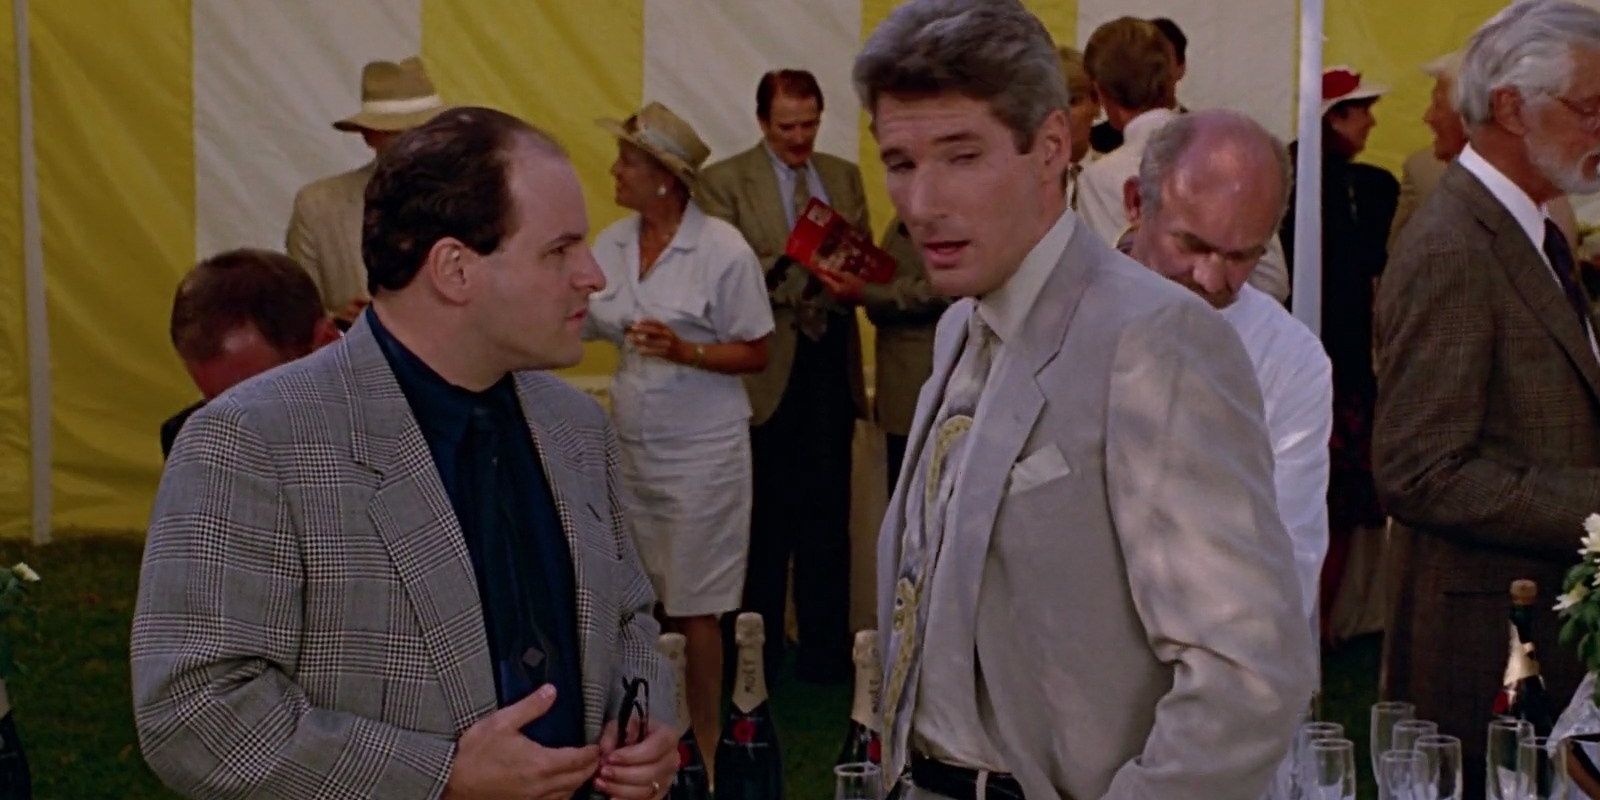 10 Things We Would Change About Pretty Woman (If It Was Made Today)